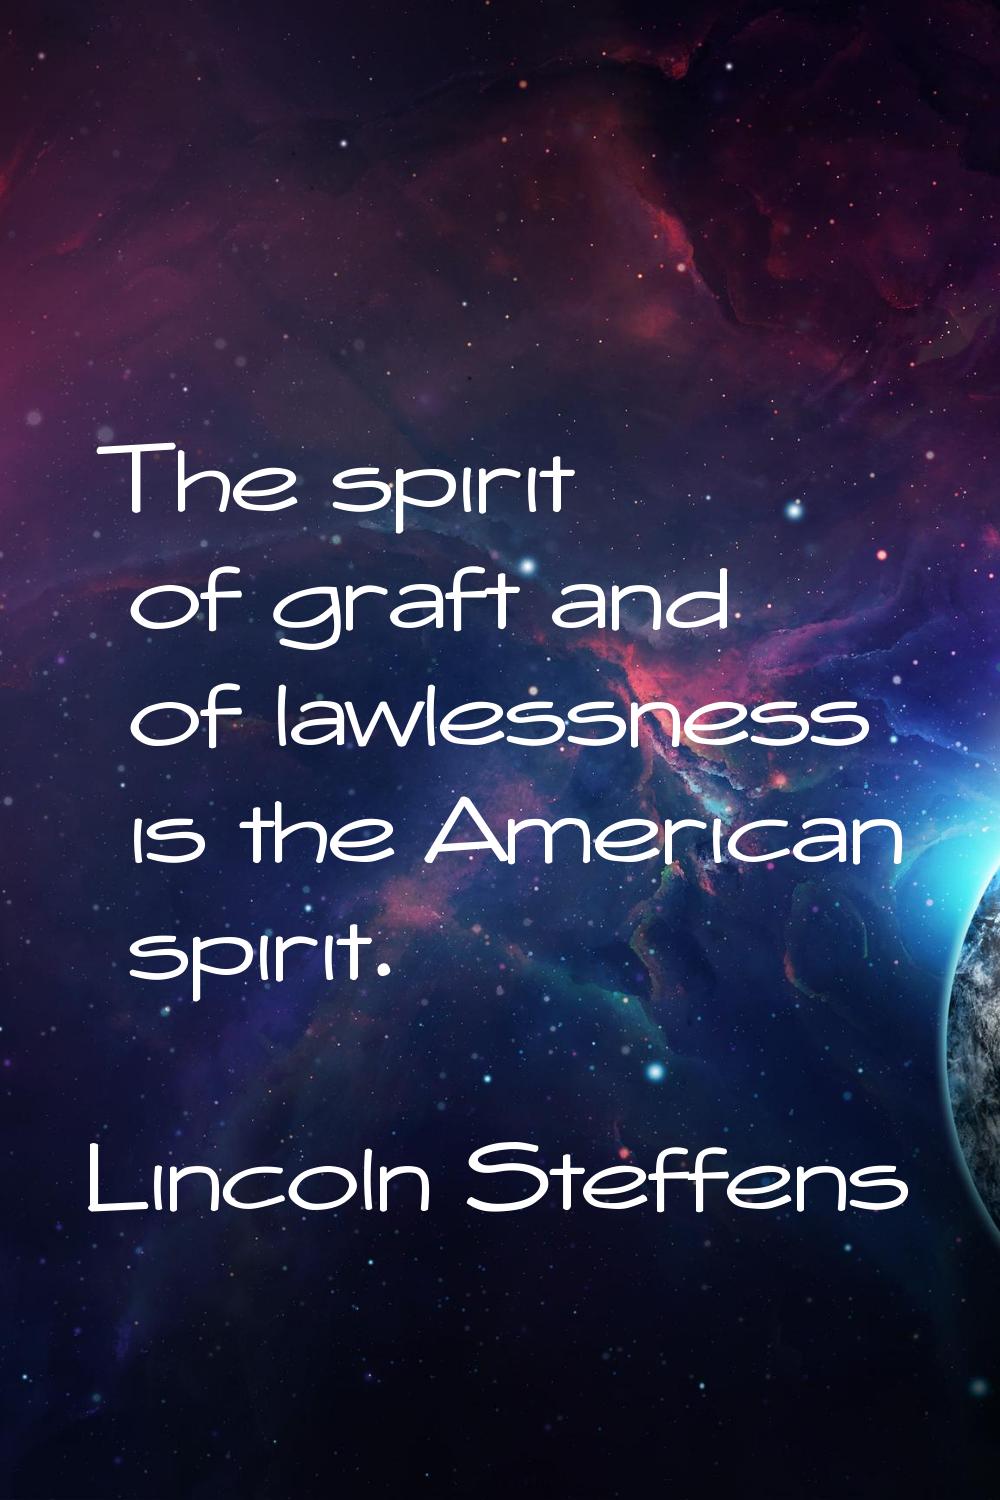 The spirit of graft and of lawlessness is the American spirit.